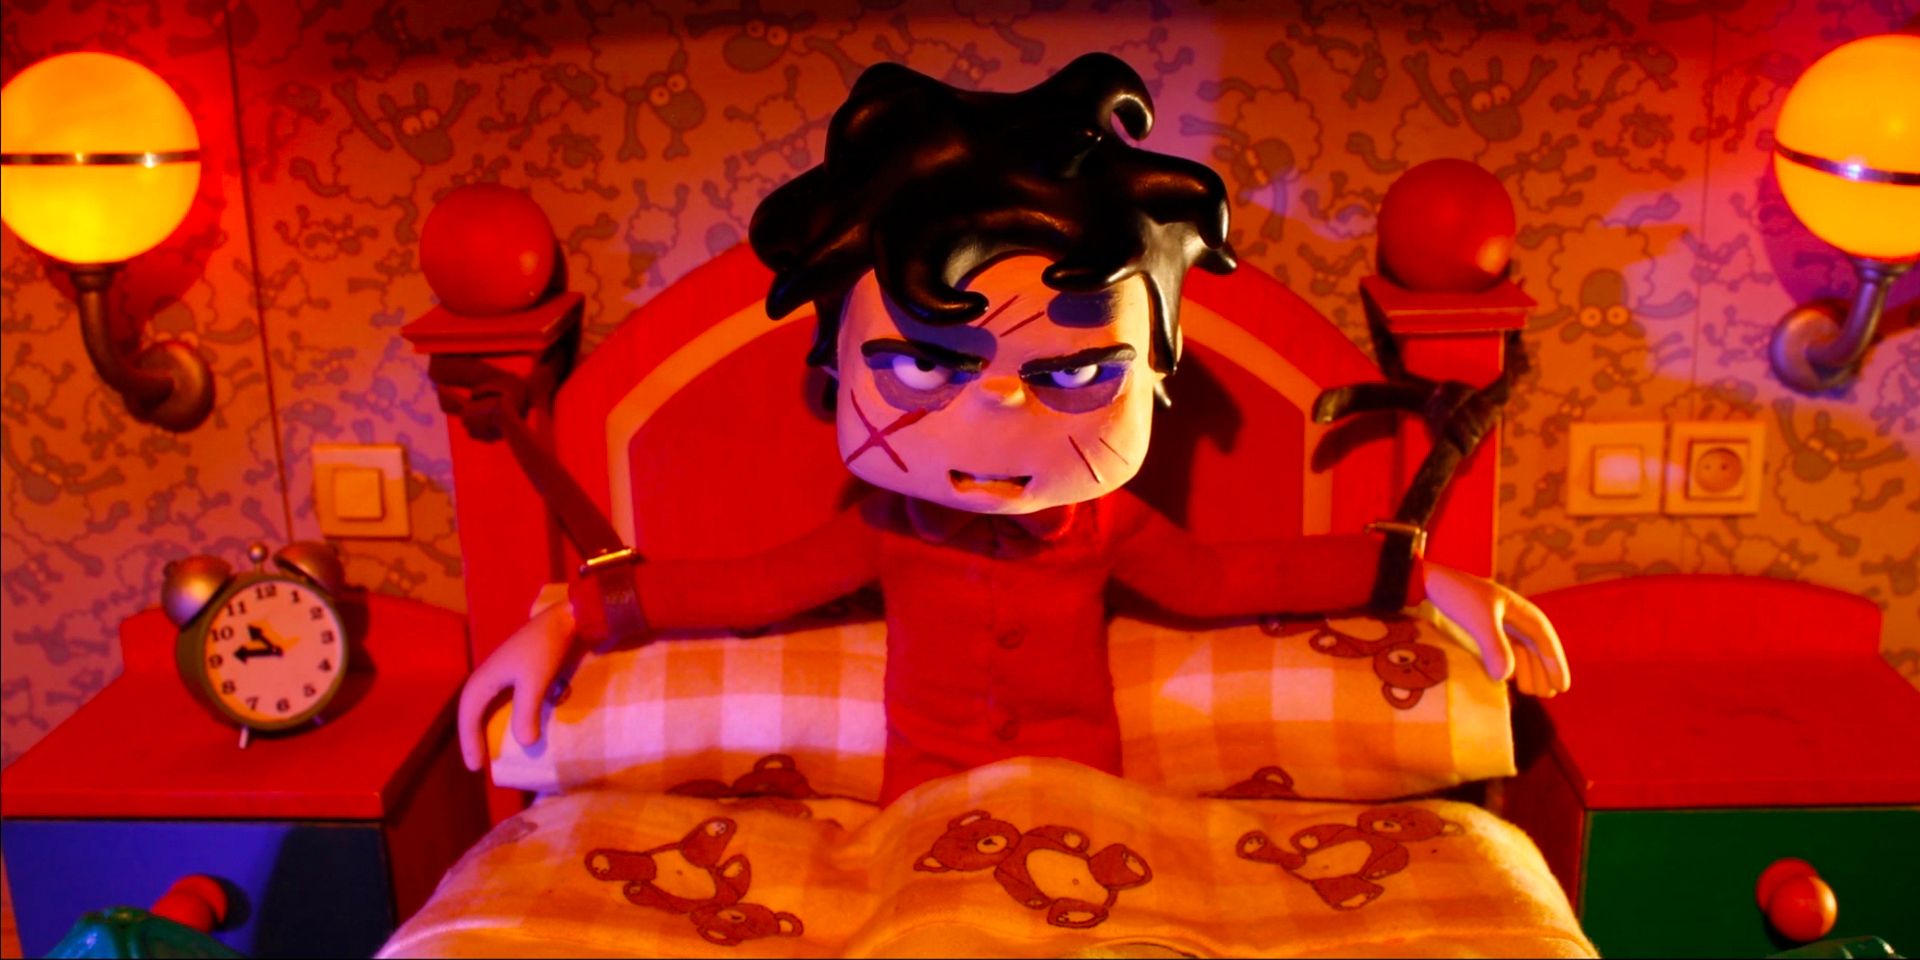 A young boy with a scratched face sits in his colourful room, strapped to the bed.